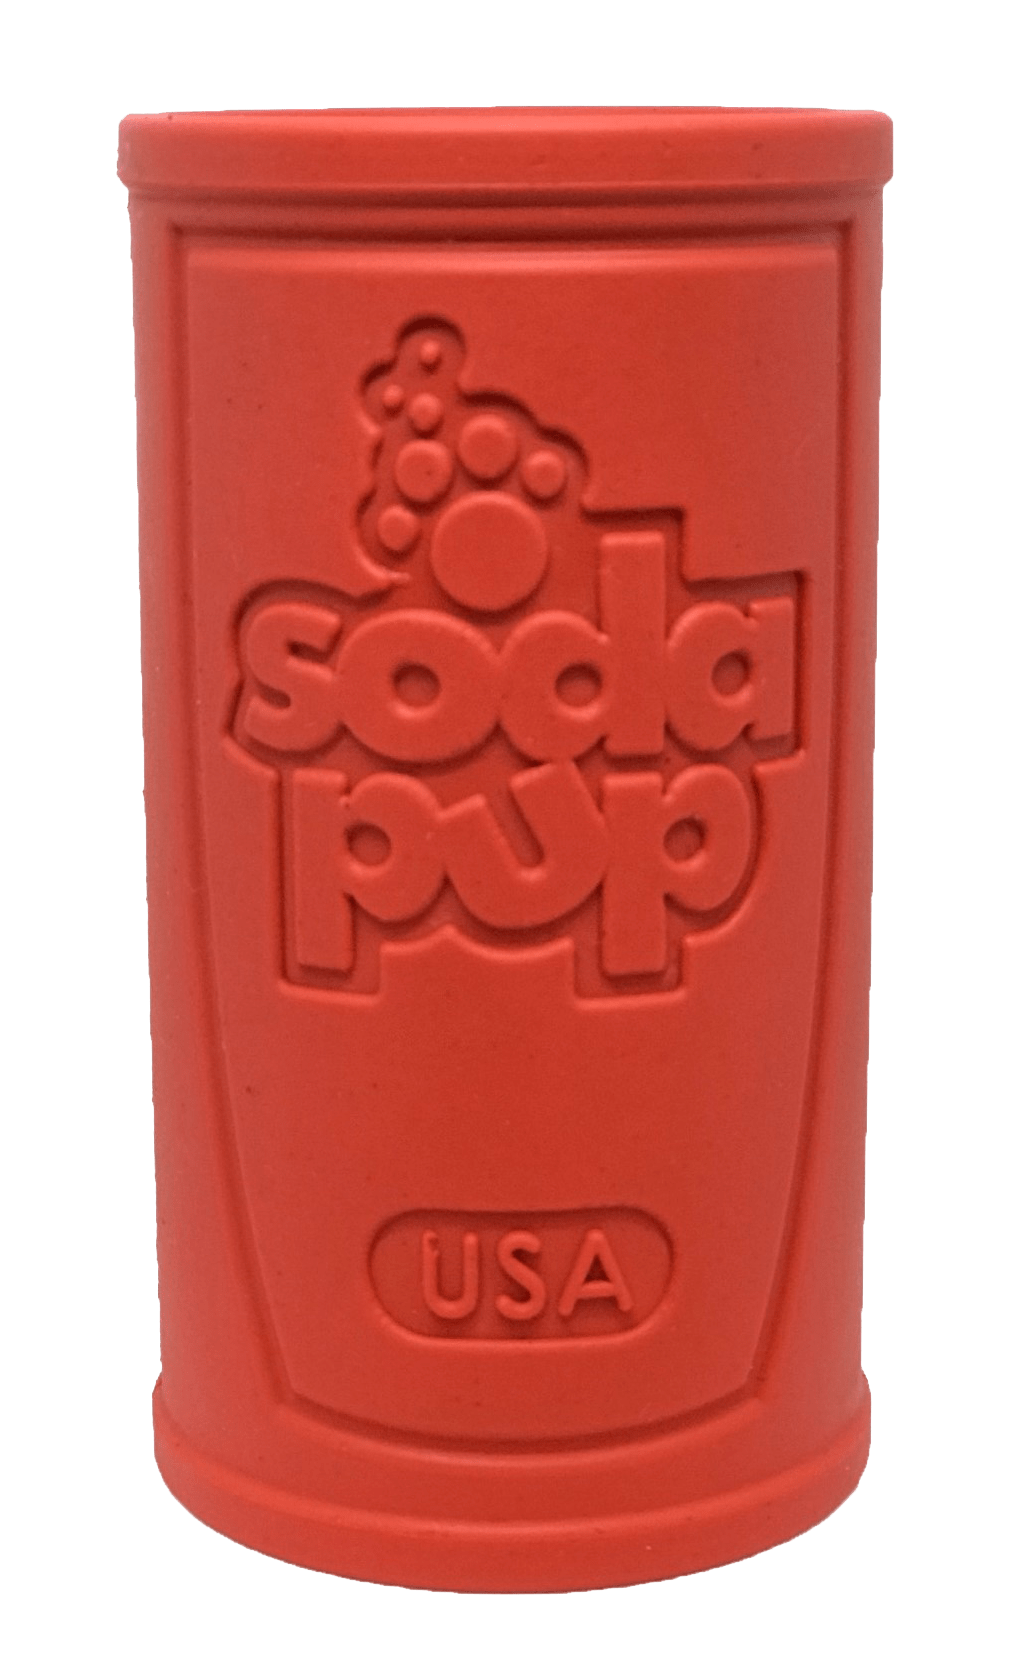 SodaPup Life Ring – Durable Dog Treat Dispenser & Chew Toy Made in USA from  Non-Toxic, Pet Safe, Food Safe Natural Rubber Material for Mental